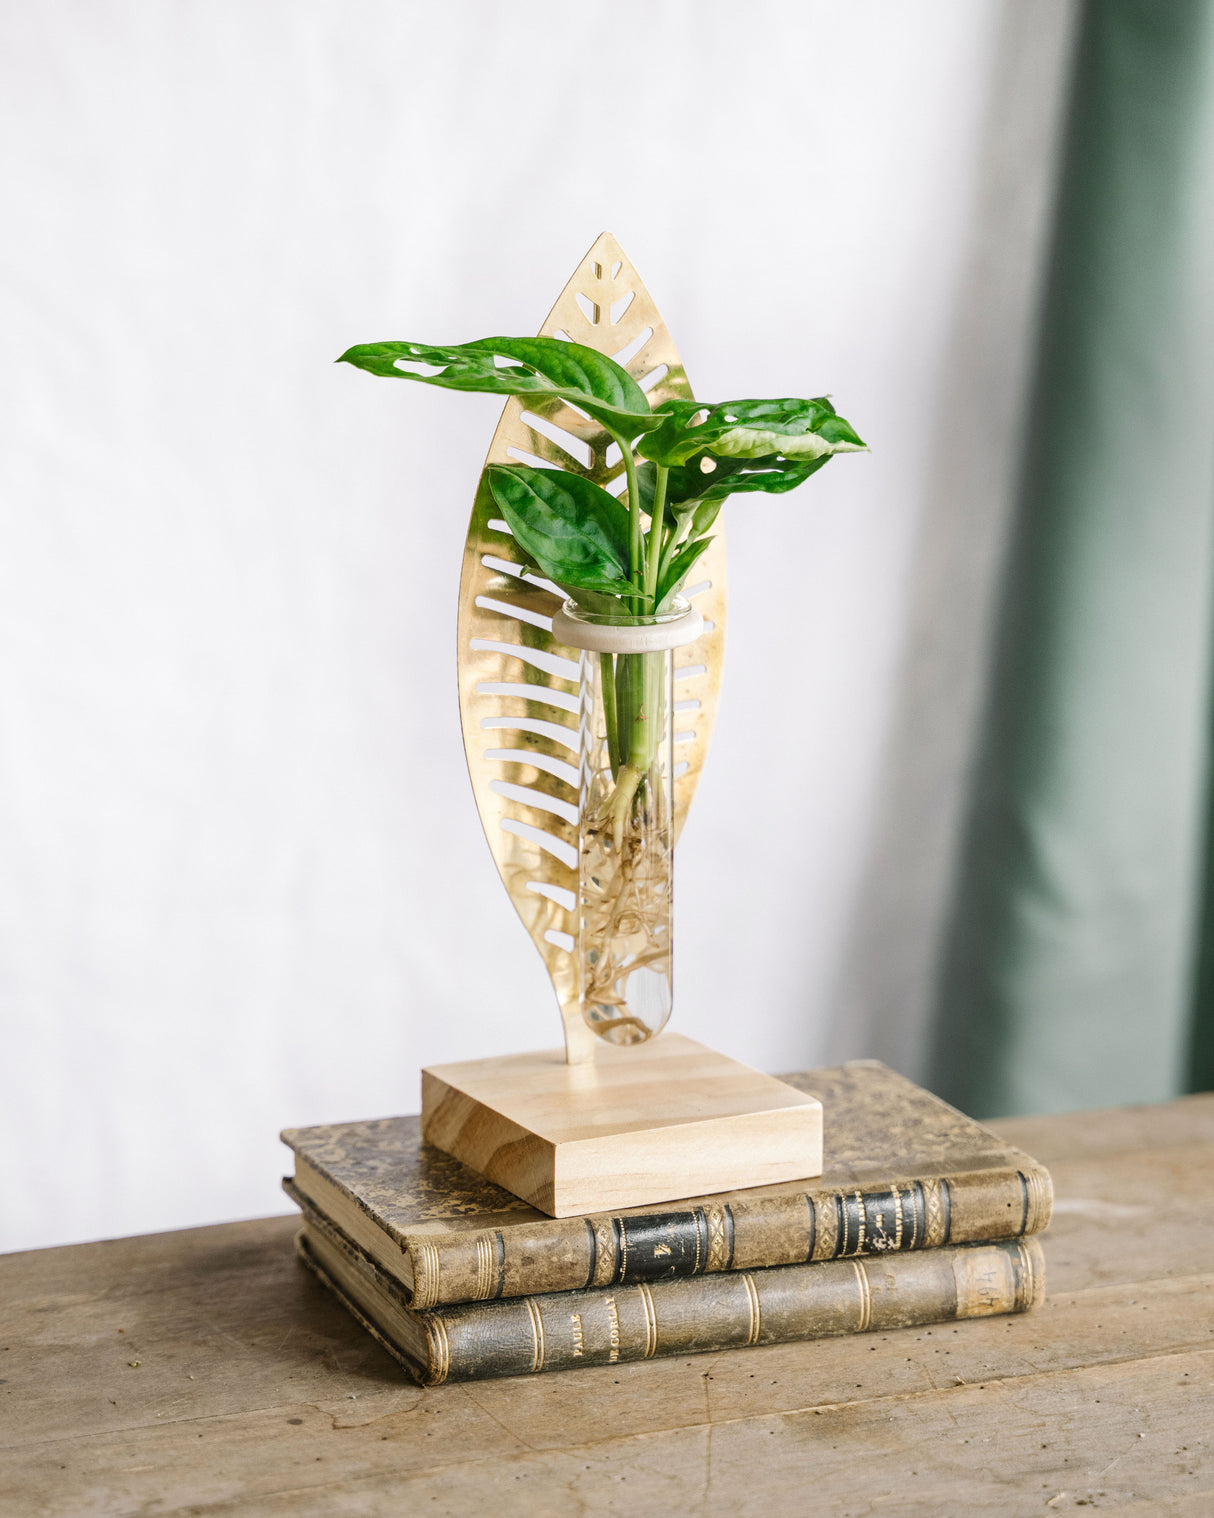 Monstera cutting and its golden leaf